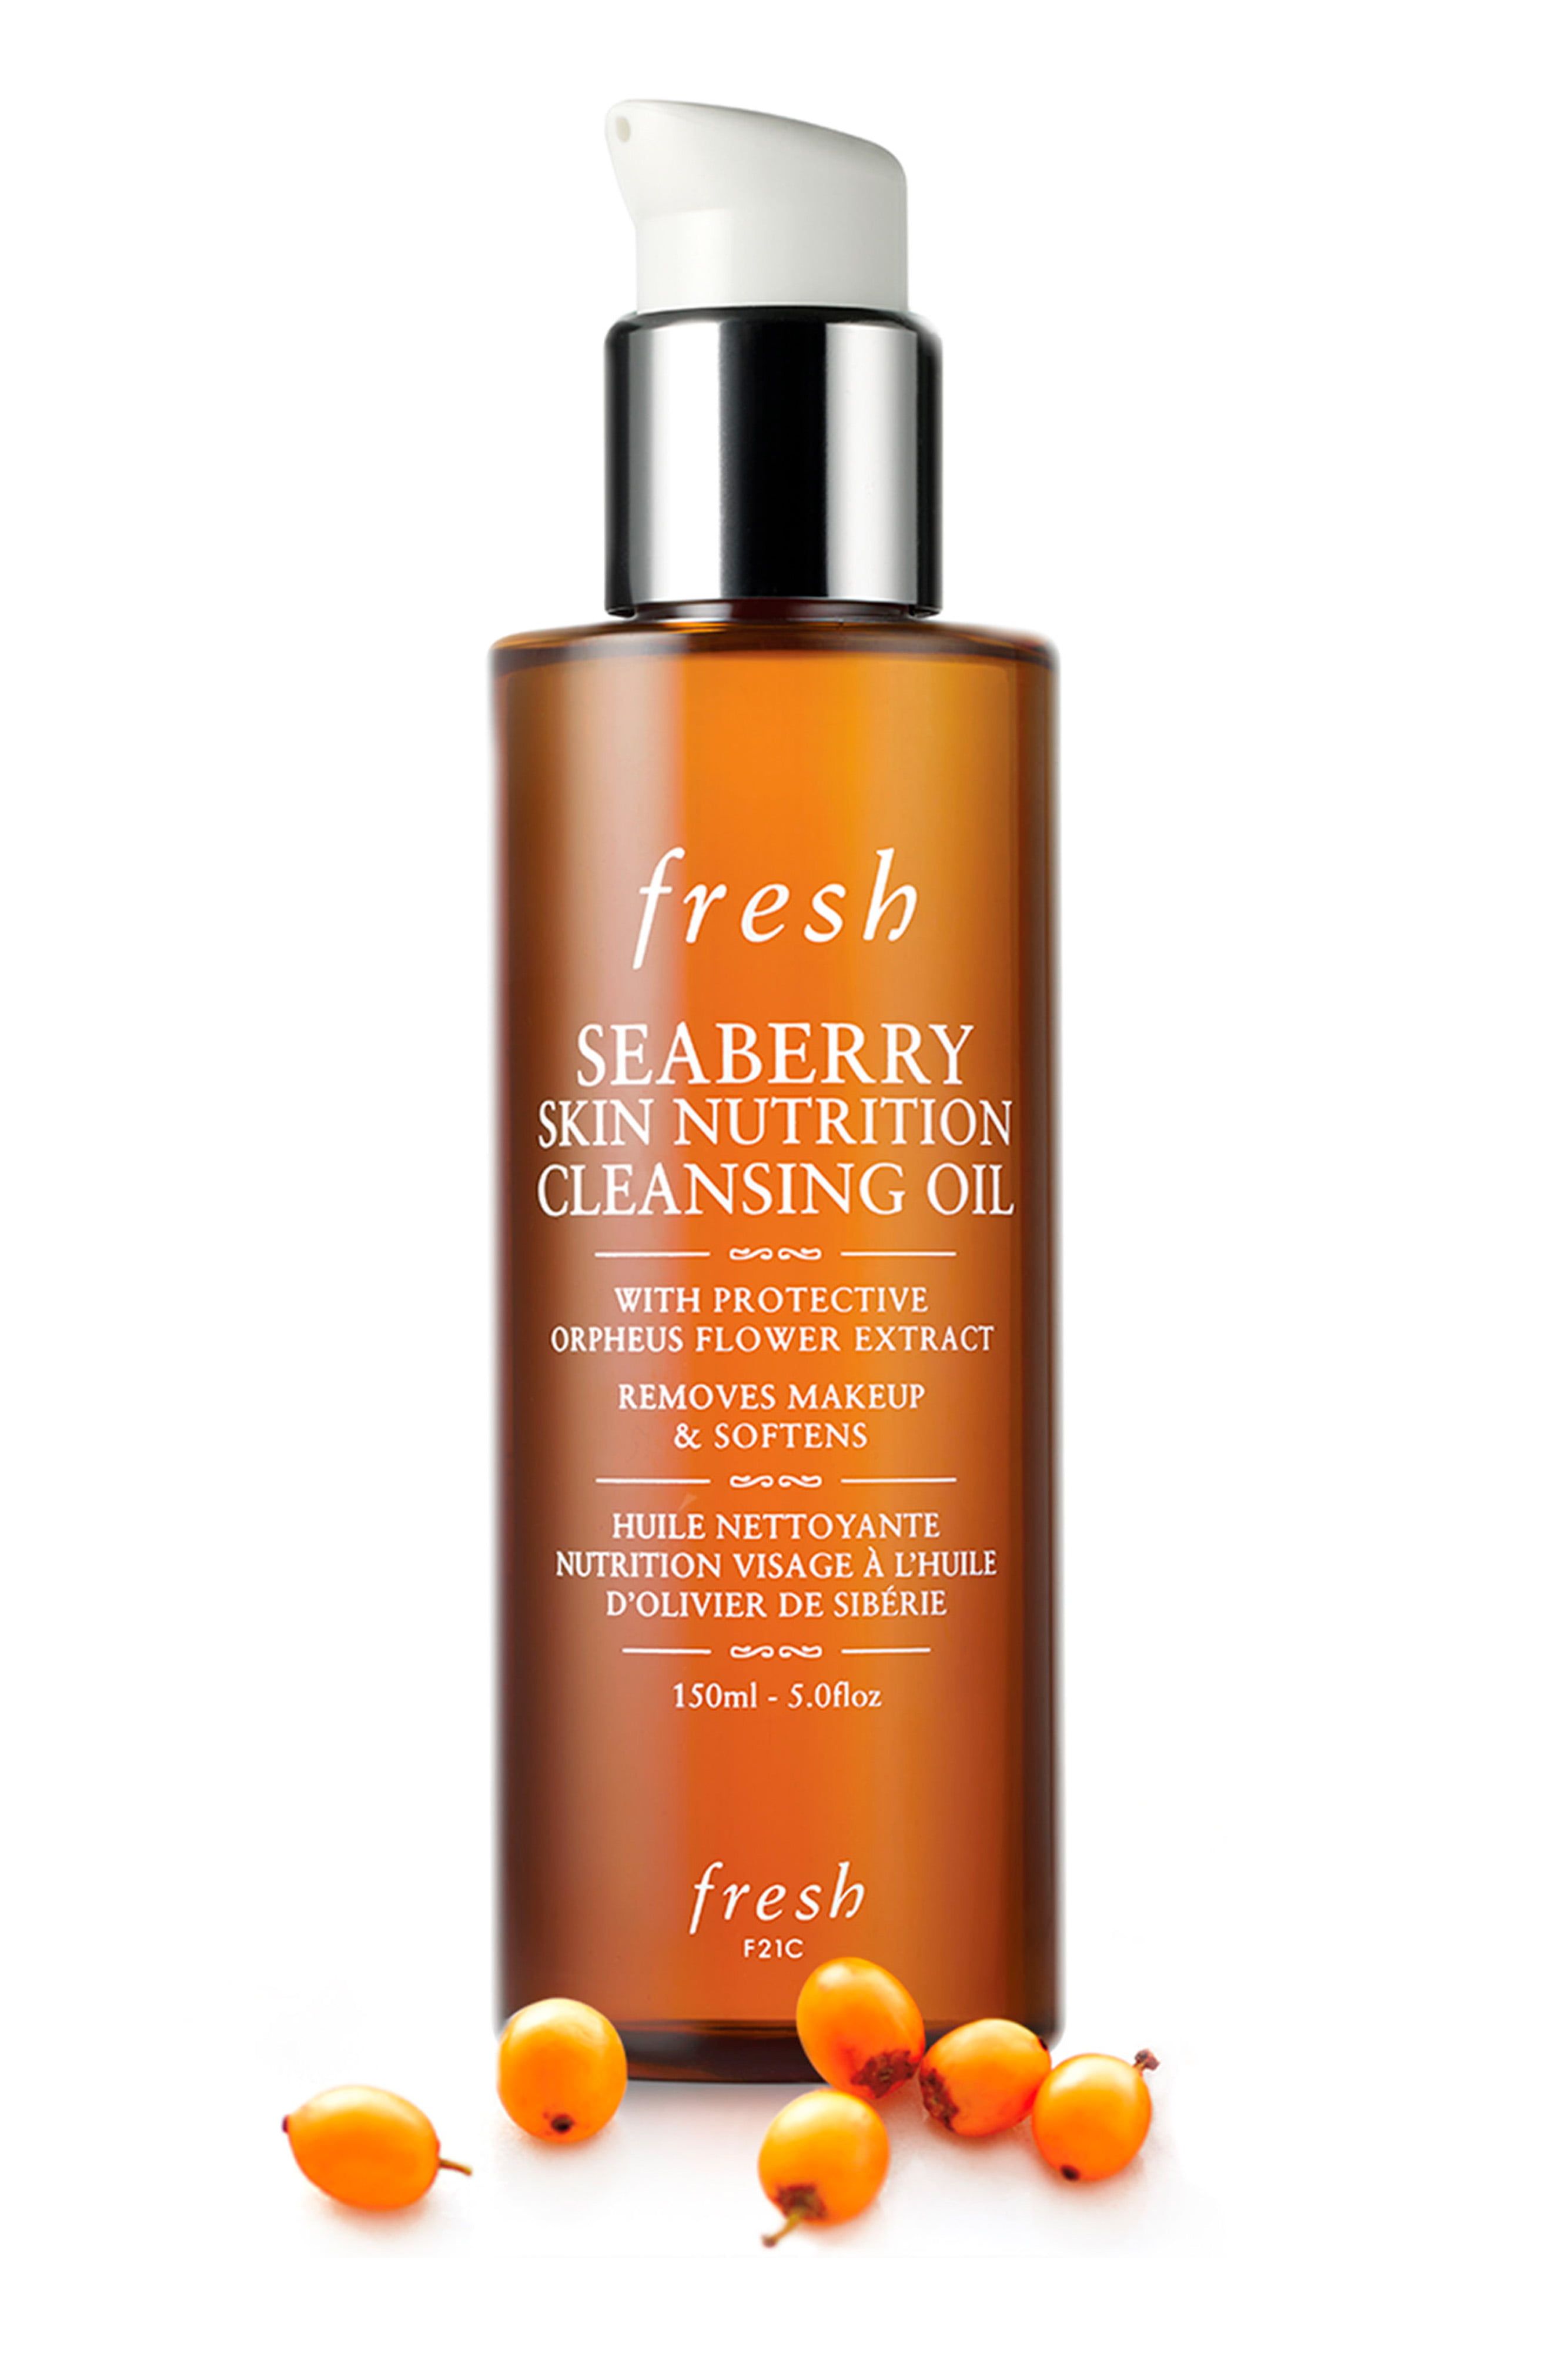 15 Best Cleansing Oils of 2022 - Dermatologist Favorite Oil Face Cleansers